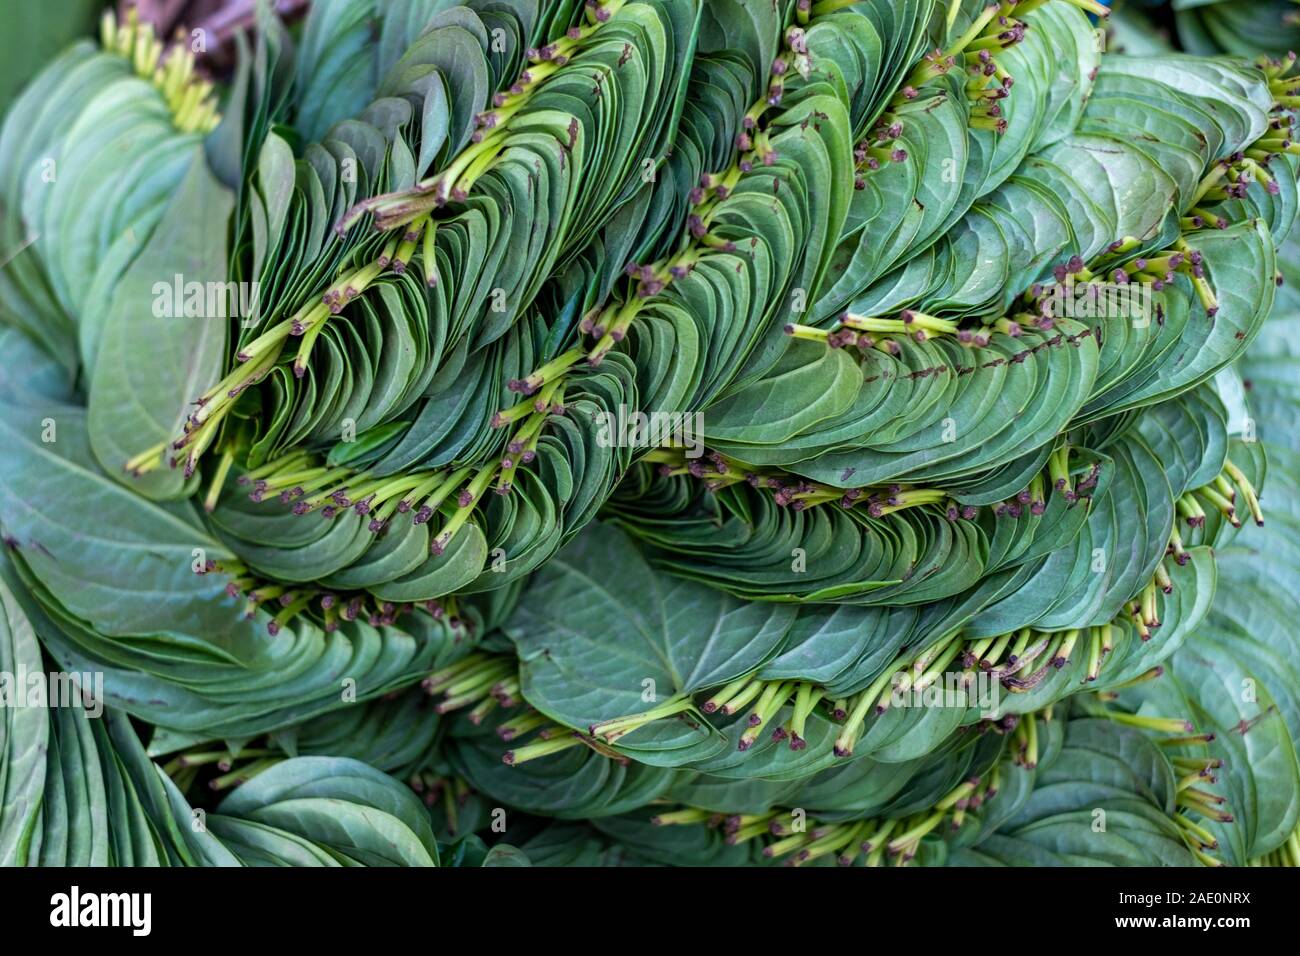 Betel leaves,usually consumed with areca nut,  found arranged artfully in a Burmese market in Mandalay, Myanmar (Burma) Stock Photo